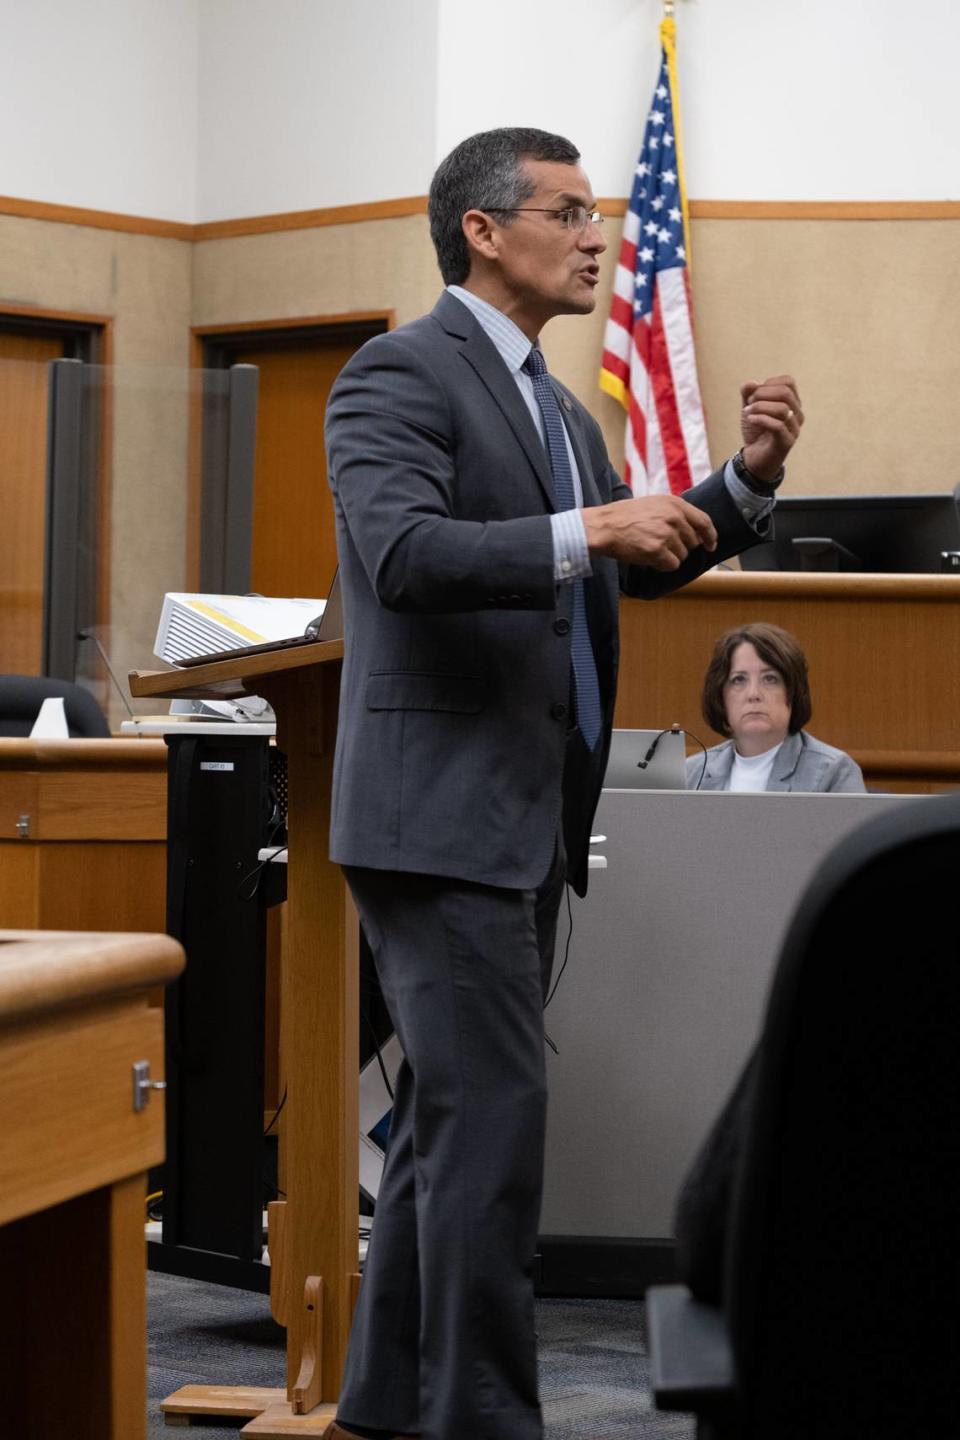 San Luis Obispo County Assistan District Attorney Eric Dobroth gives his opening statements in the murder trial against Stephen Deflaun in San Luis Obispo Superior Court on March 27, 2023.